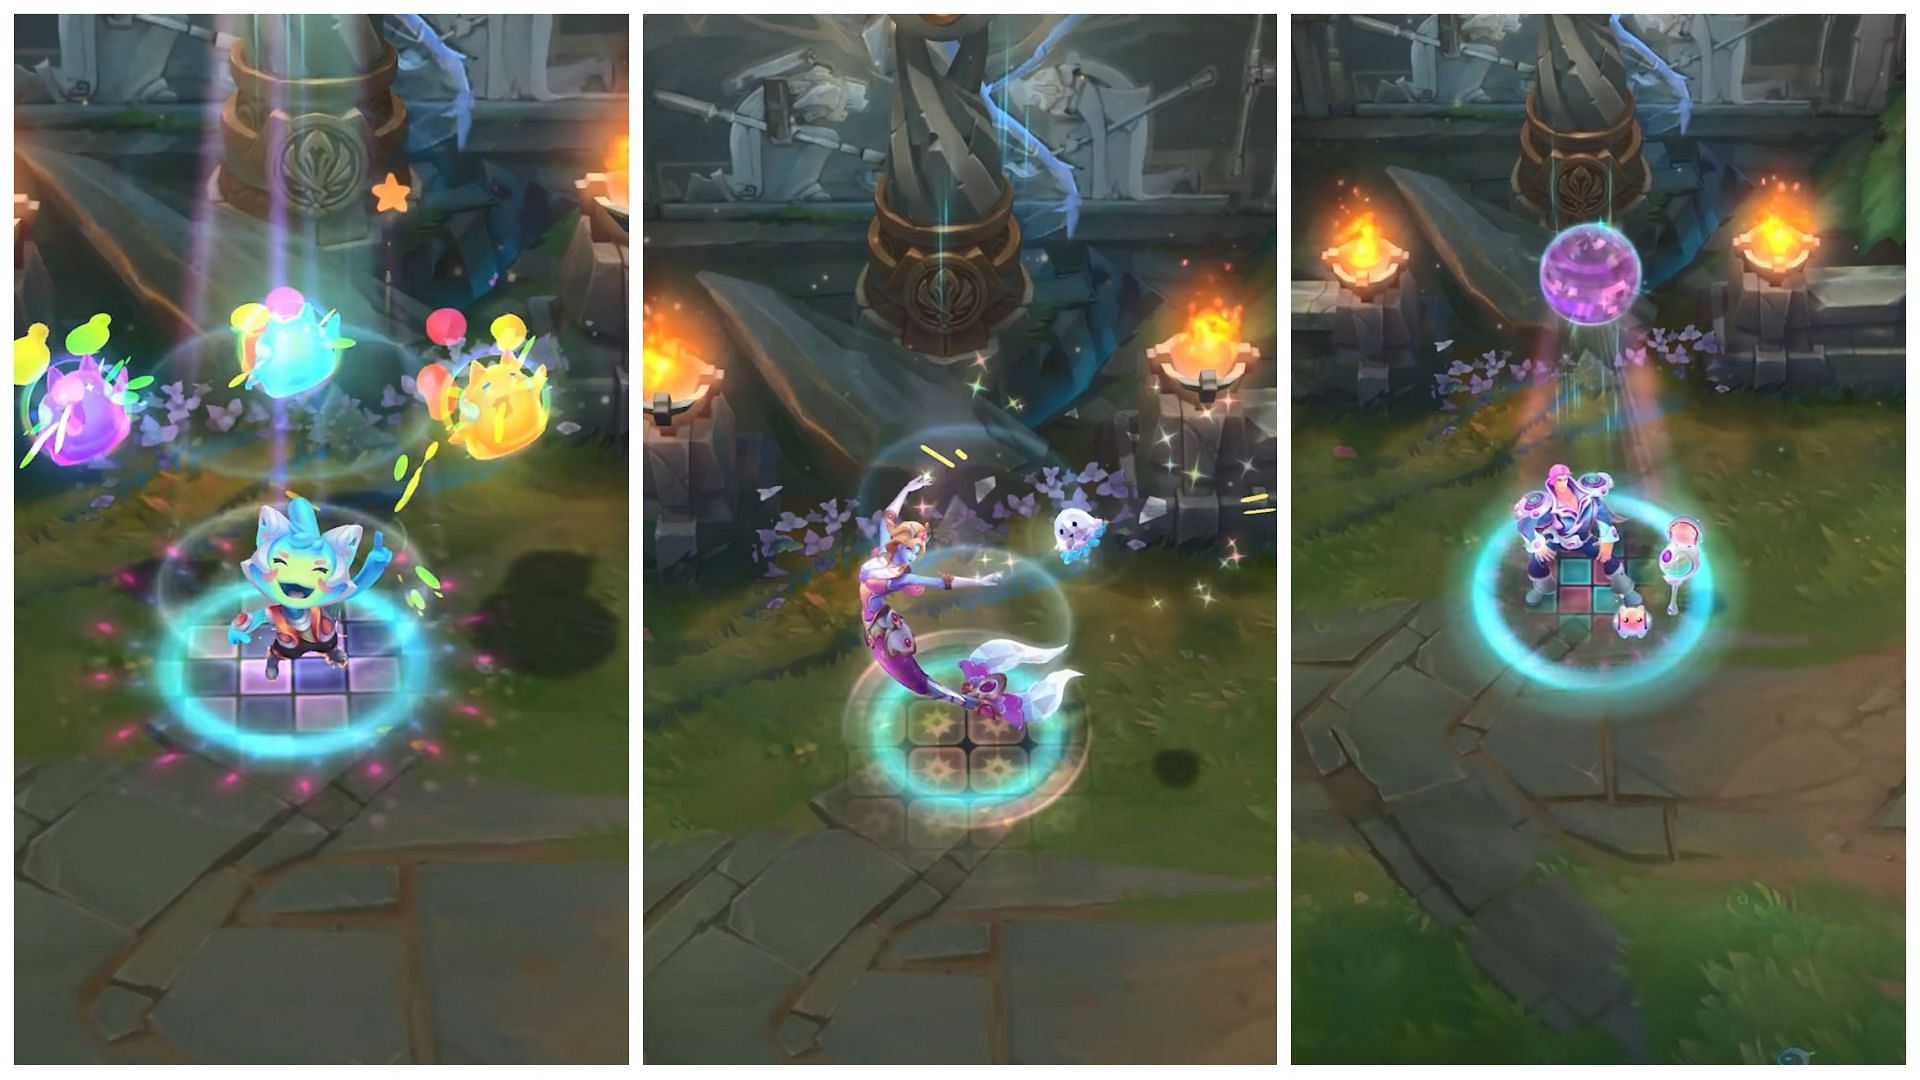 Nami, Ornn, Teemo, Lissandra, Taric, Gragas, and Twisted Fate will soon join the Space Grooves. (images via Riot Games)